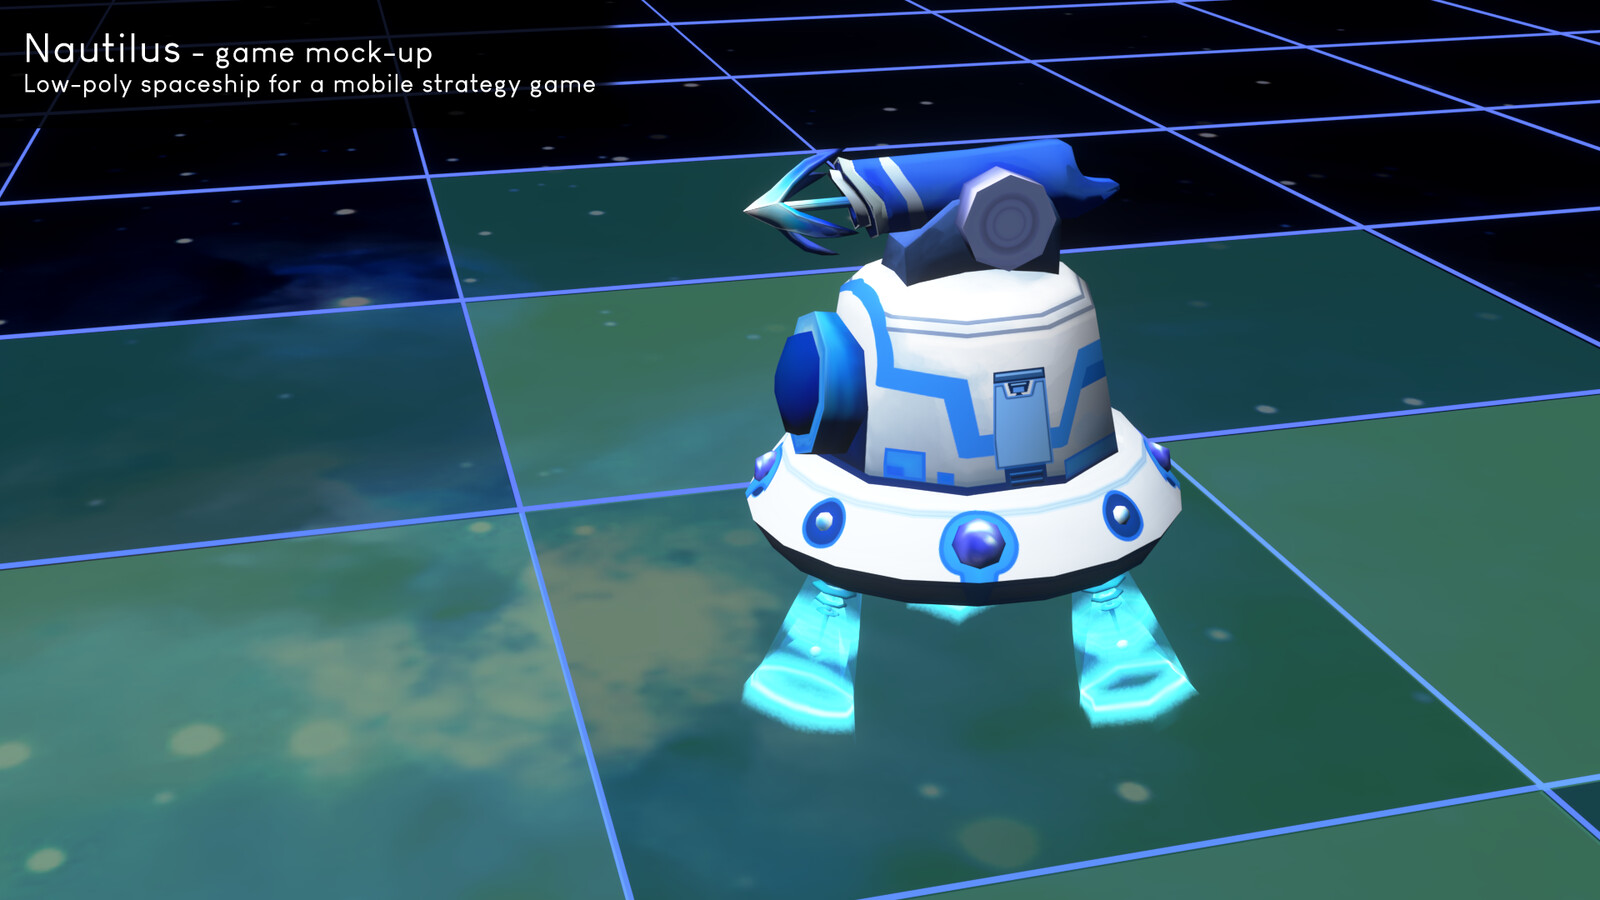 Animated low-poly model, suitable for mobile games.
Game mock-up rendered in Blender.